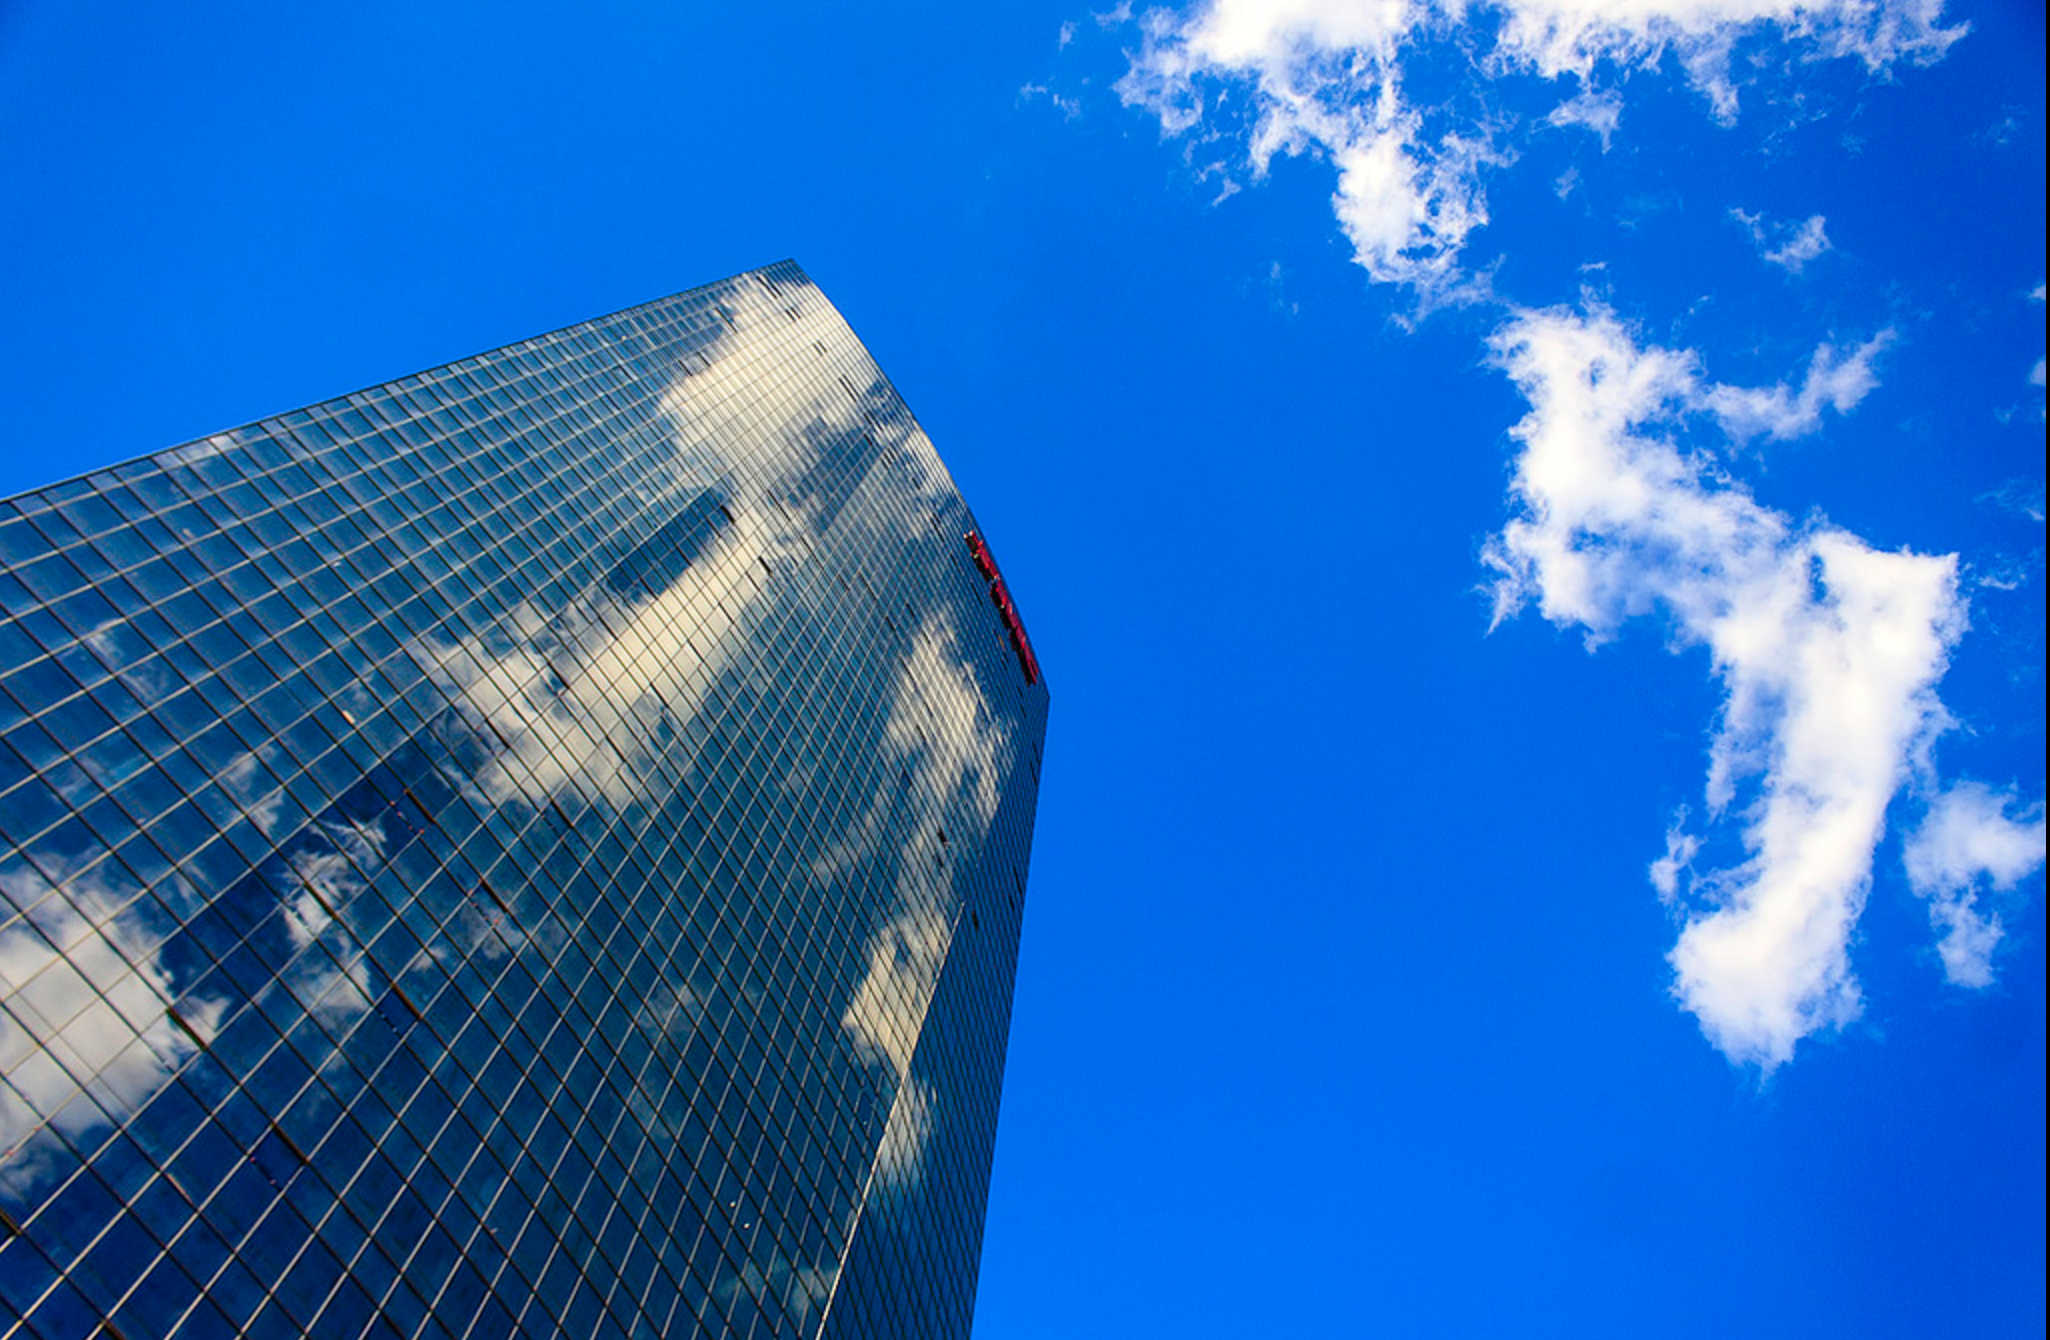 Cloud magnet - FMC from Cira Green | Steve Ives, EOTS Flickr Group